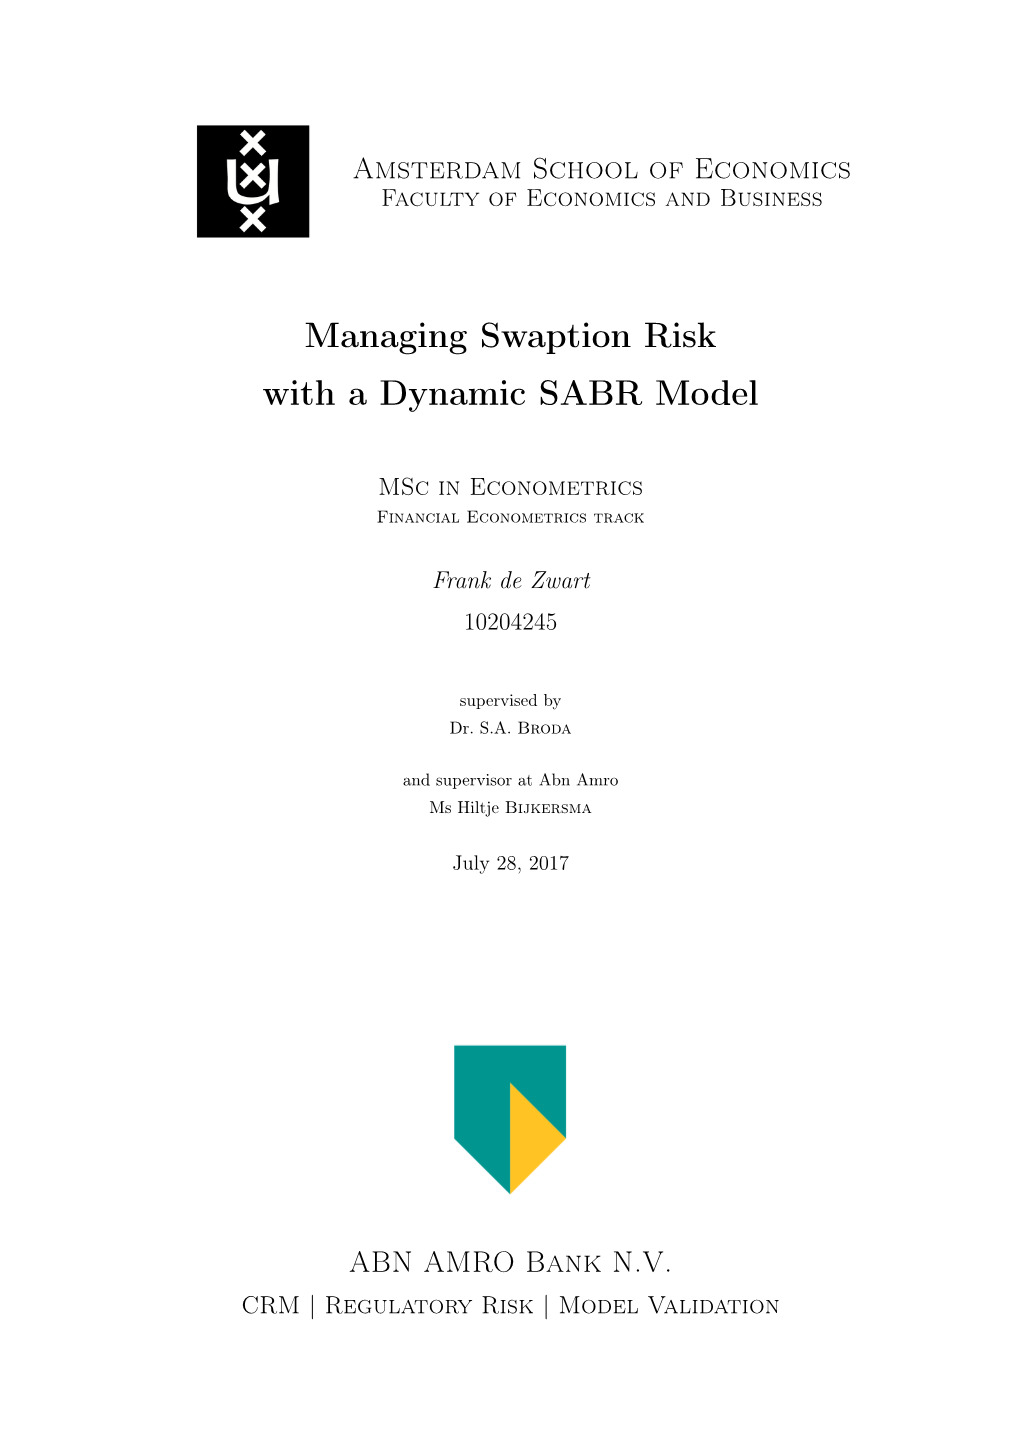 Managing Swaption Risk with a Dynamic SABR Model